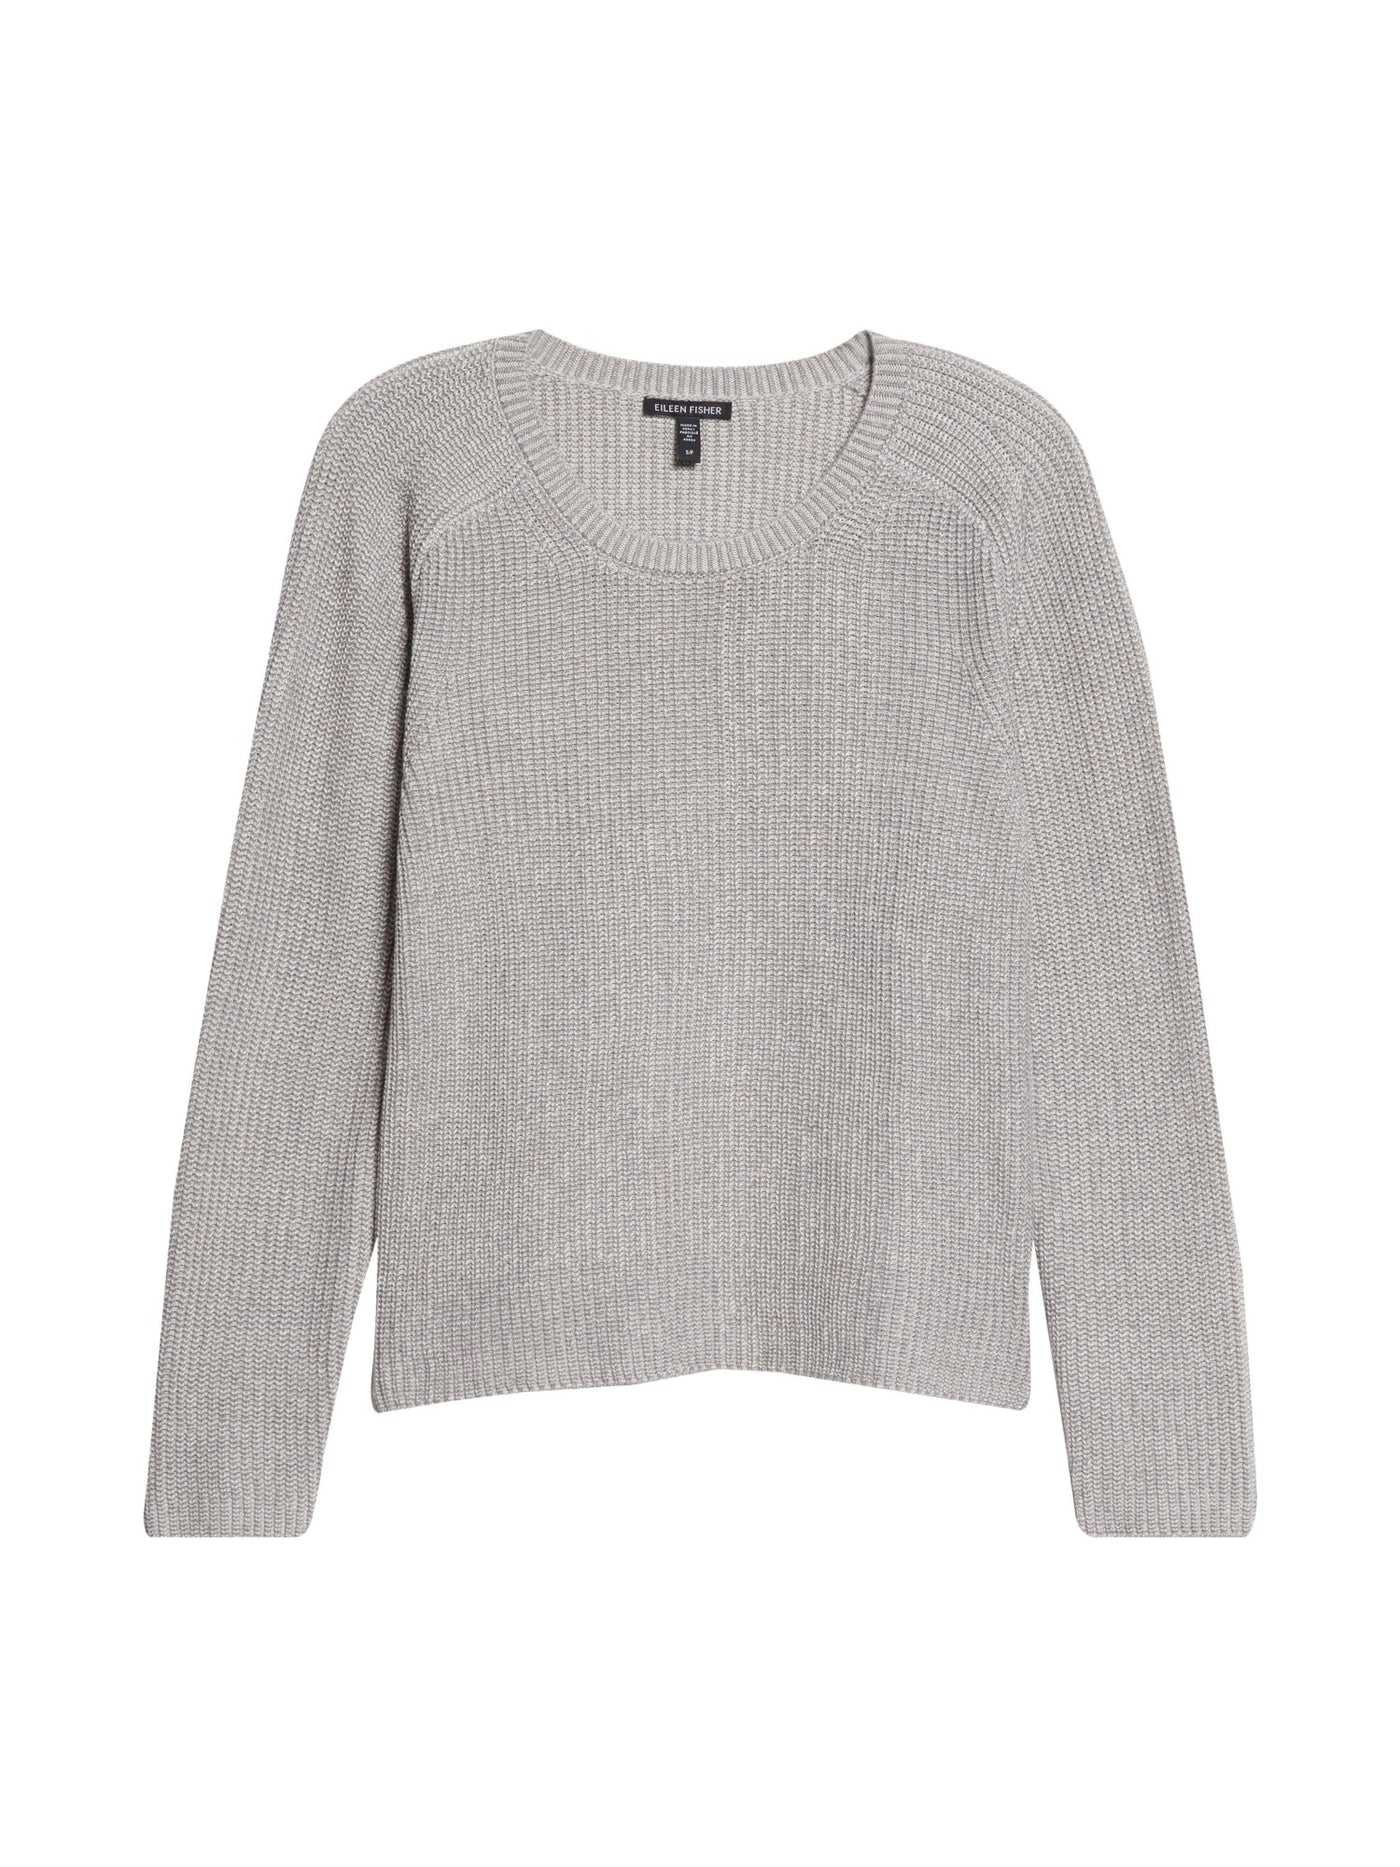 EILEEN FISHER Womens Gray Ribbed Drop-shoulder Knit Long Sleeve Scoop Neck Sweater Petites PP